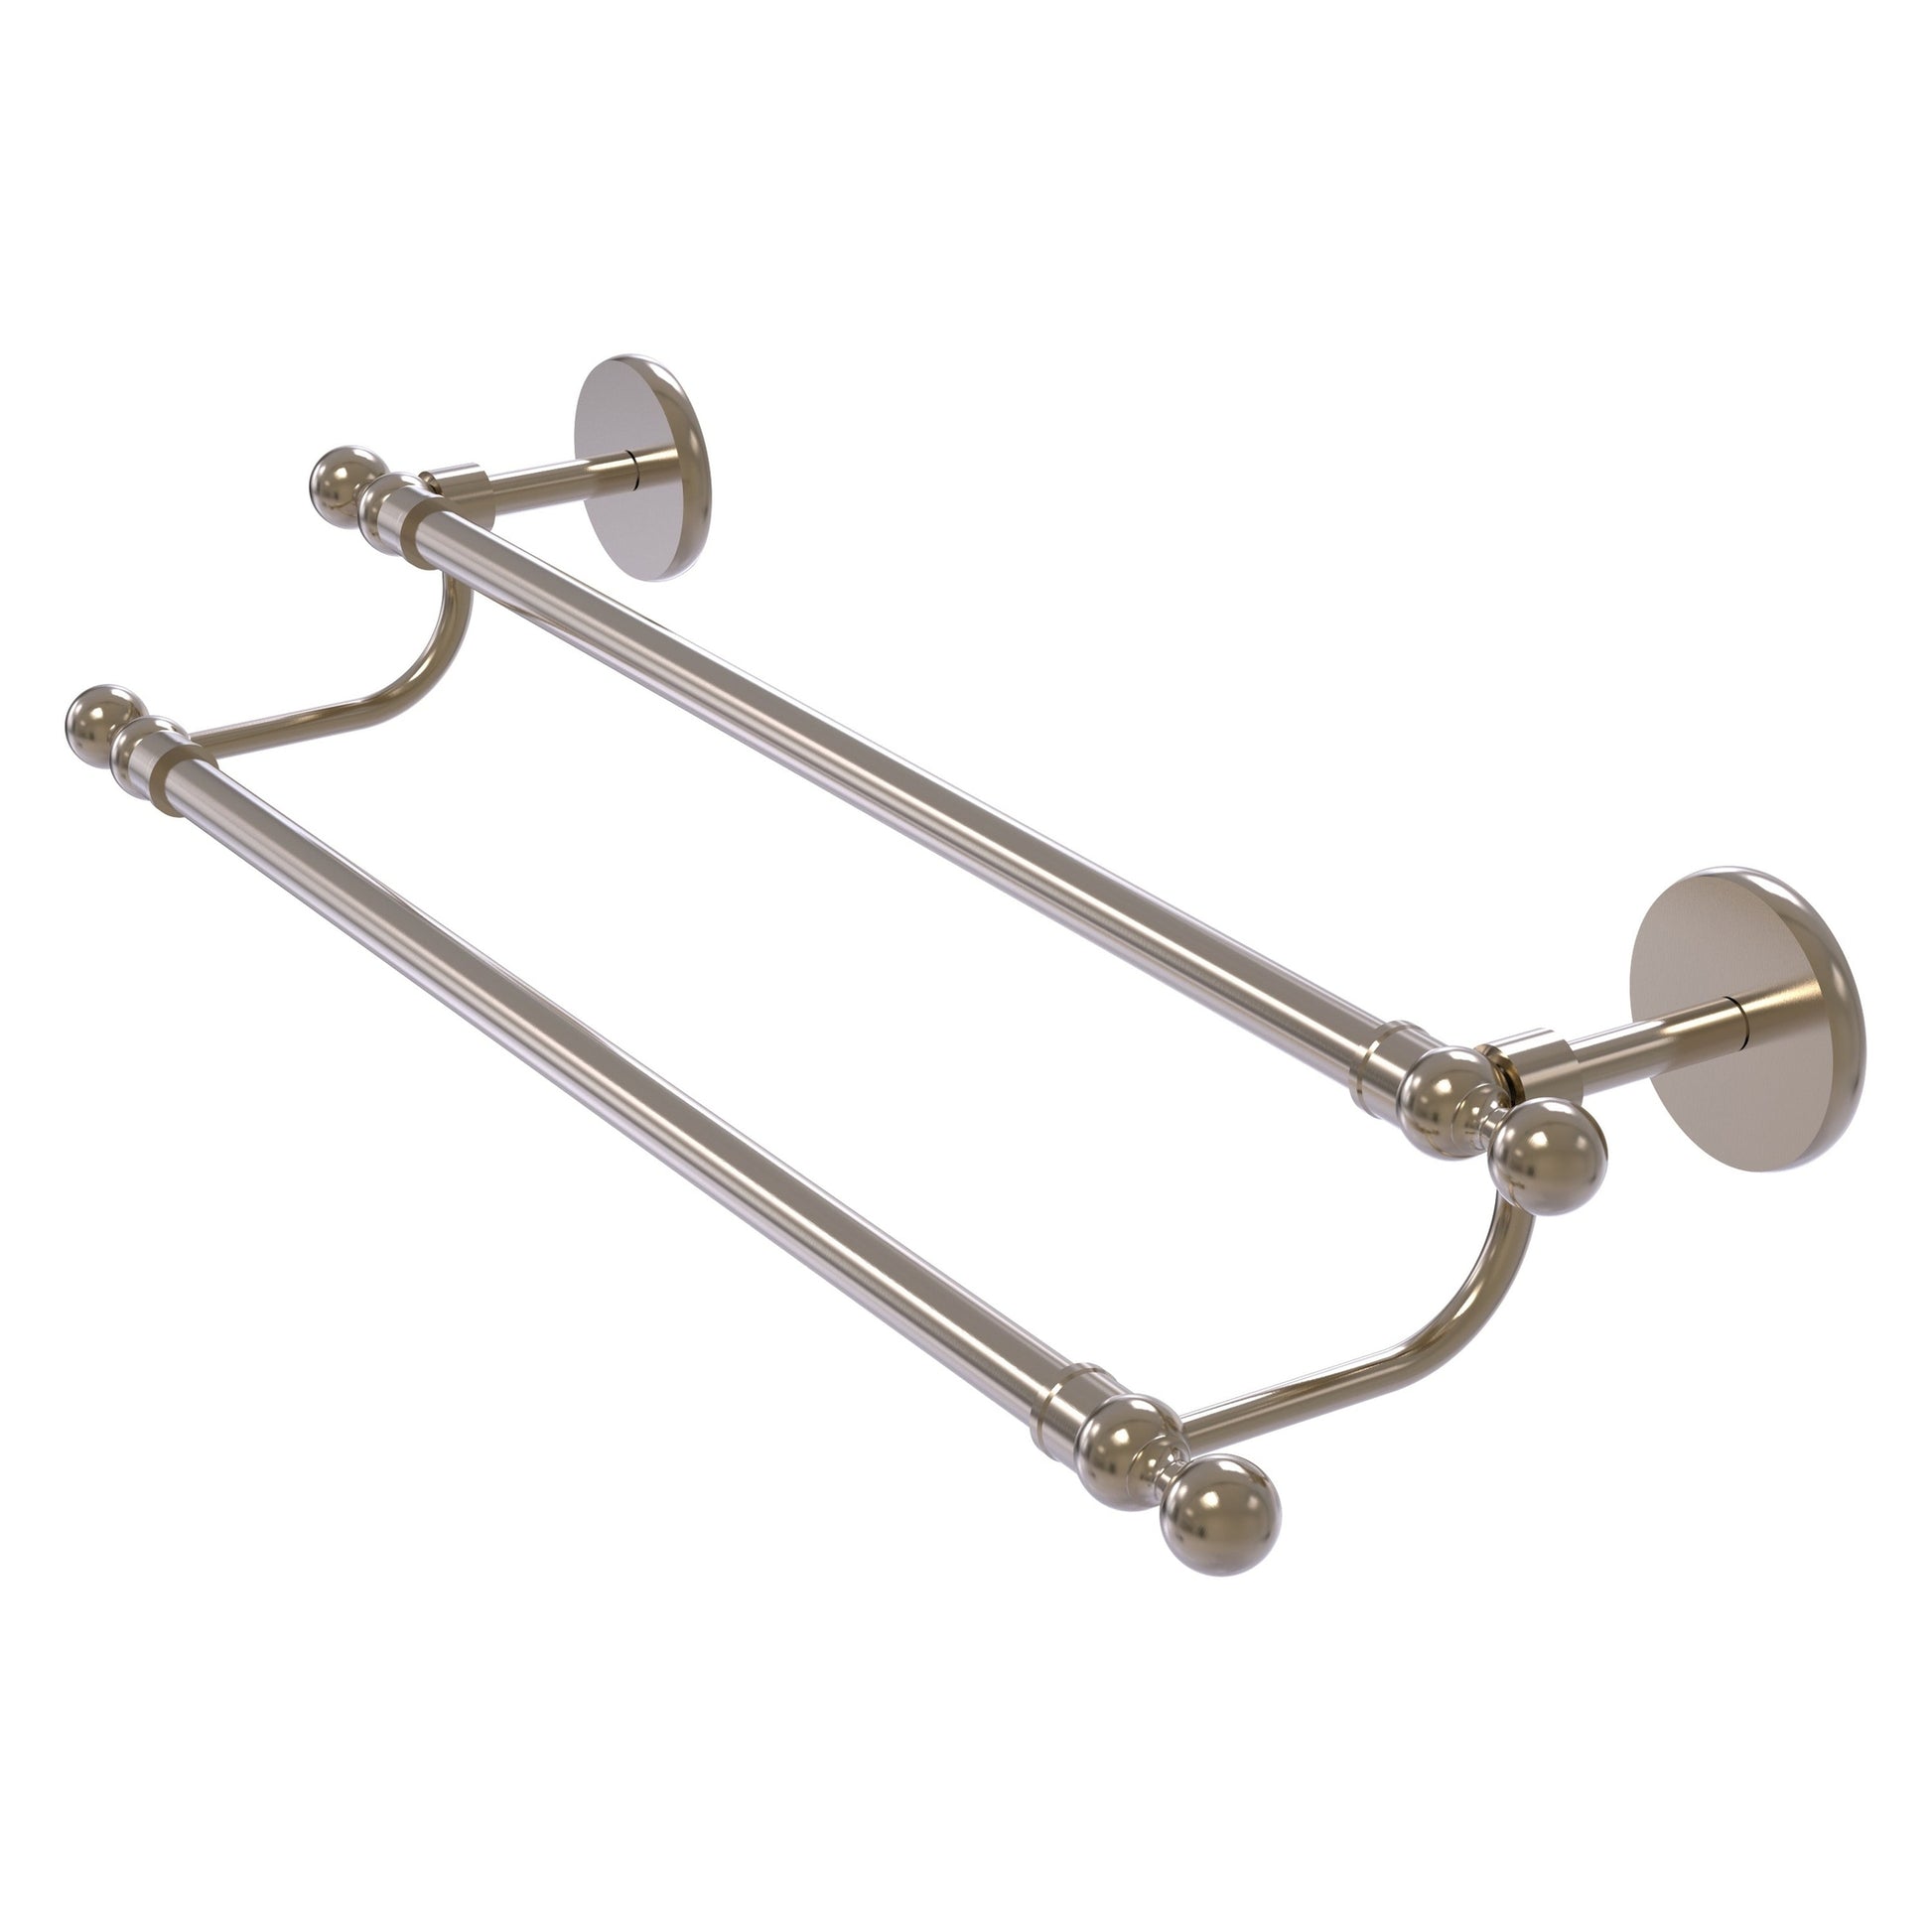 Foxtrot Collection Towel Ring in Antique Pewter